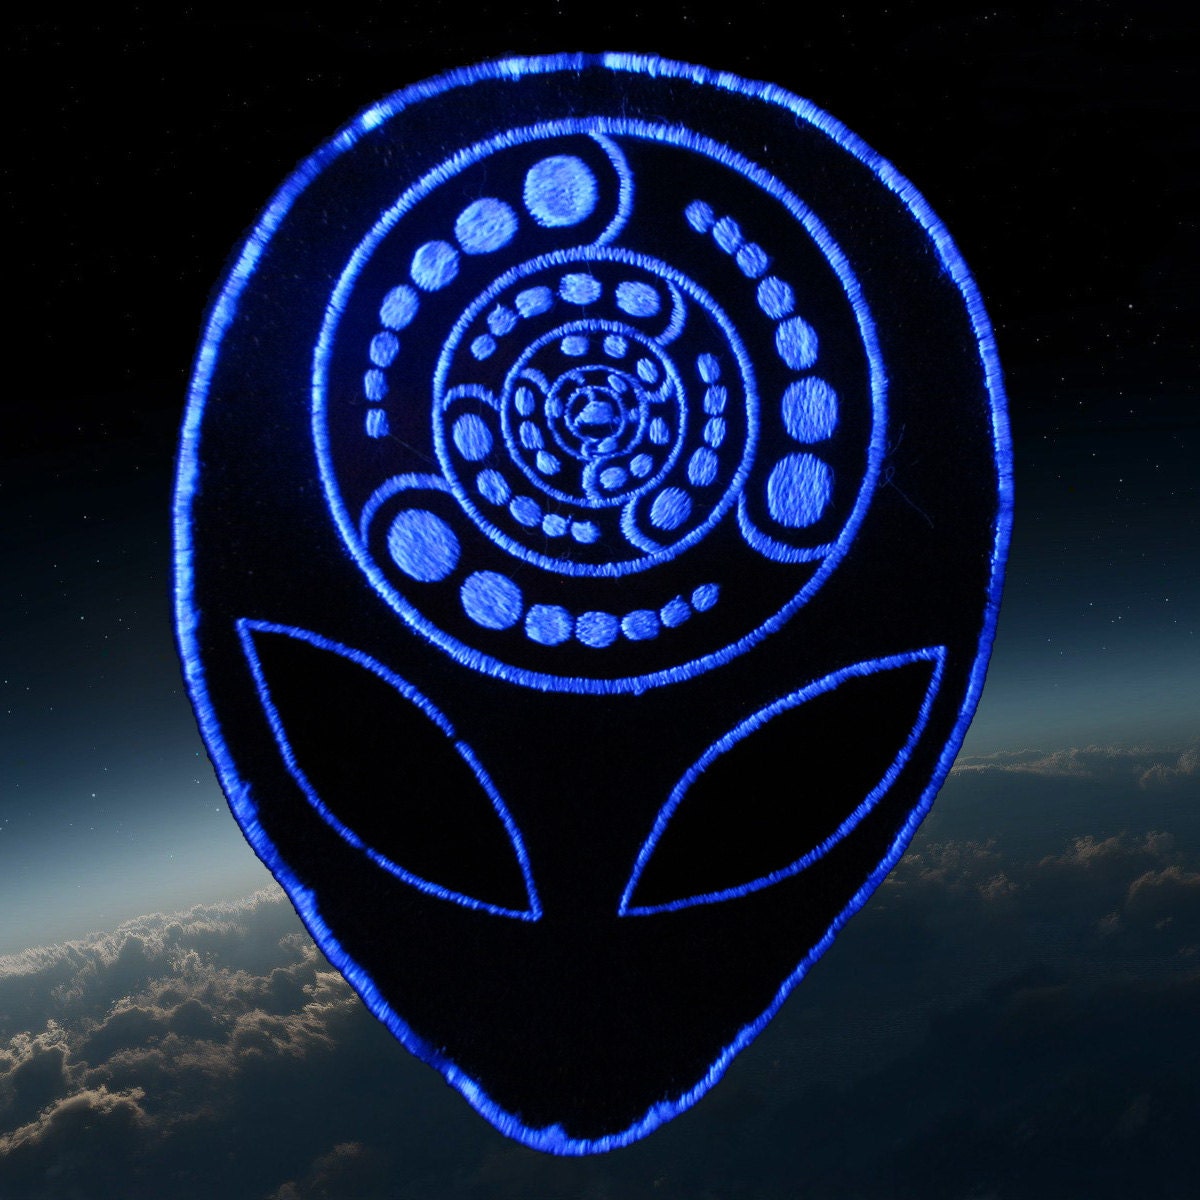 Silver Shining Alien Crop Circle embroidery Patch Attributes free energy sacred geometry from space holy patterns consciousness expanding ET